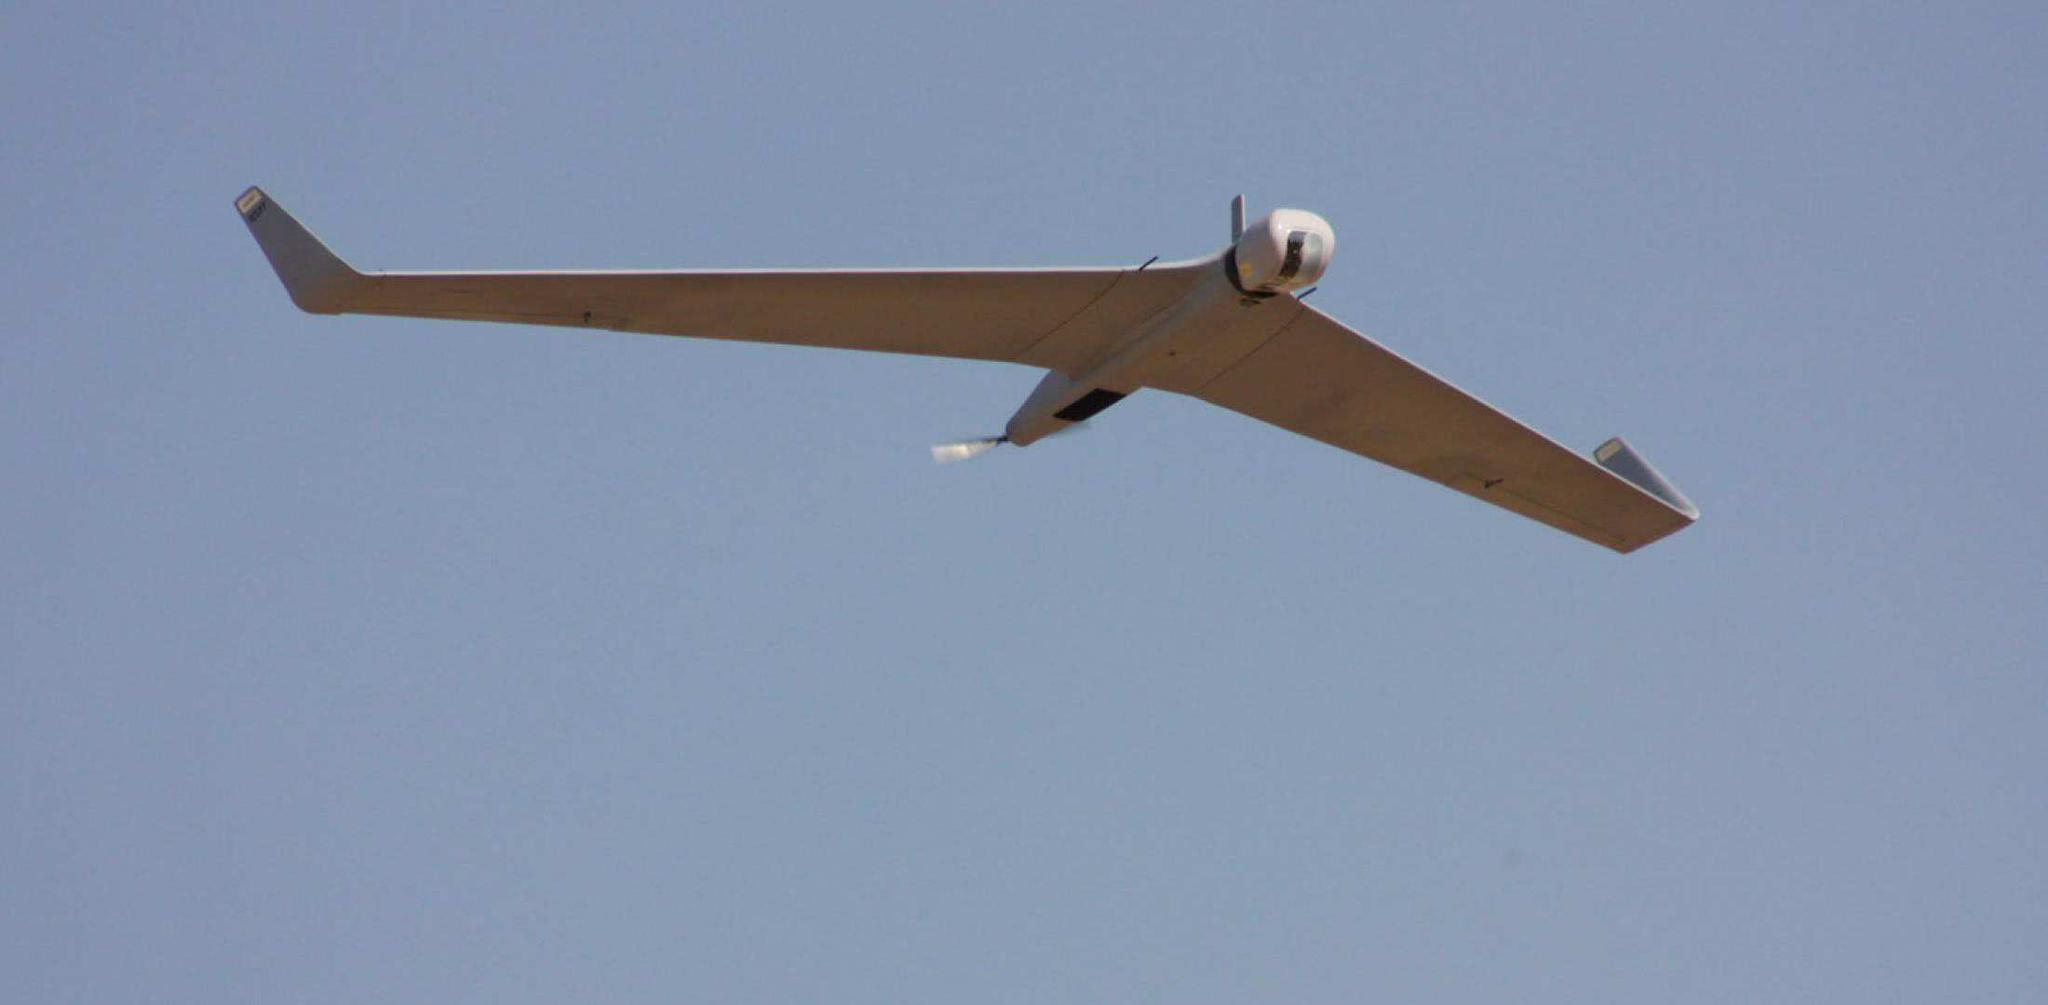 Yemeni Houthis uses drones to attack multiple targets in Saudi Arabia